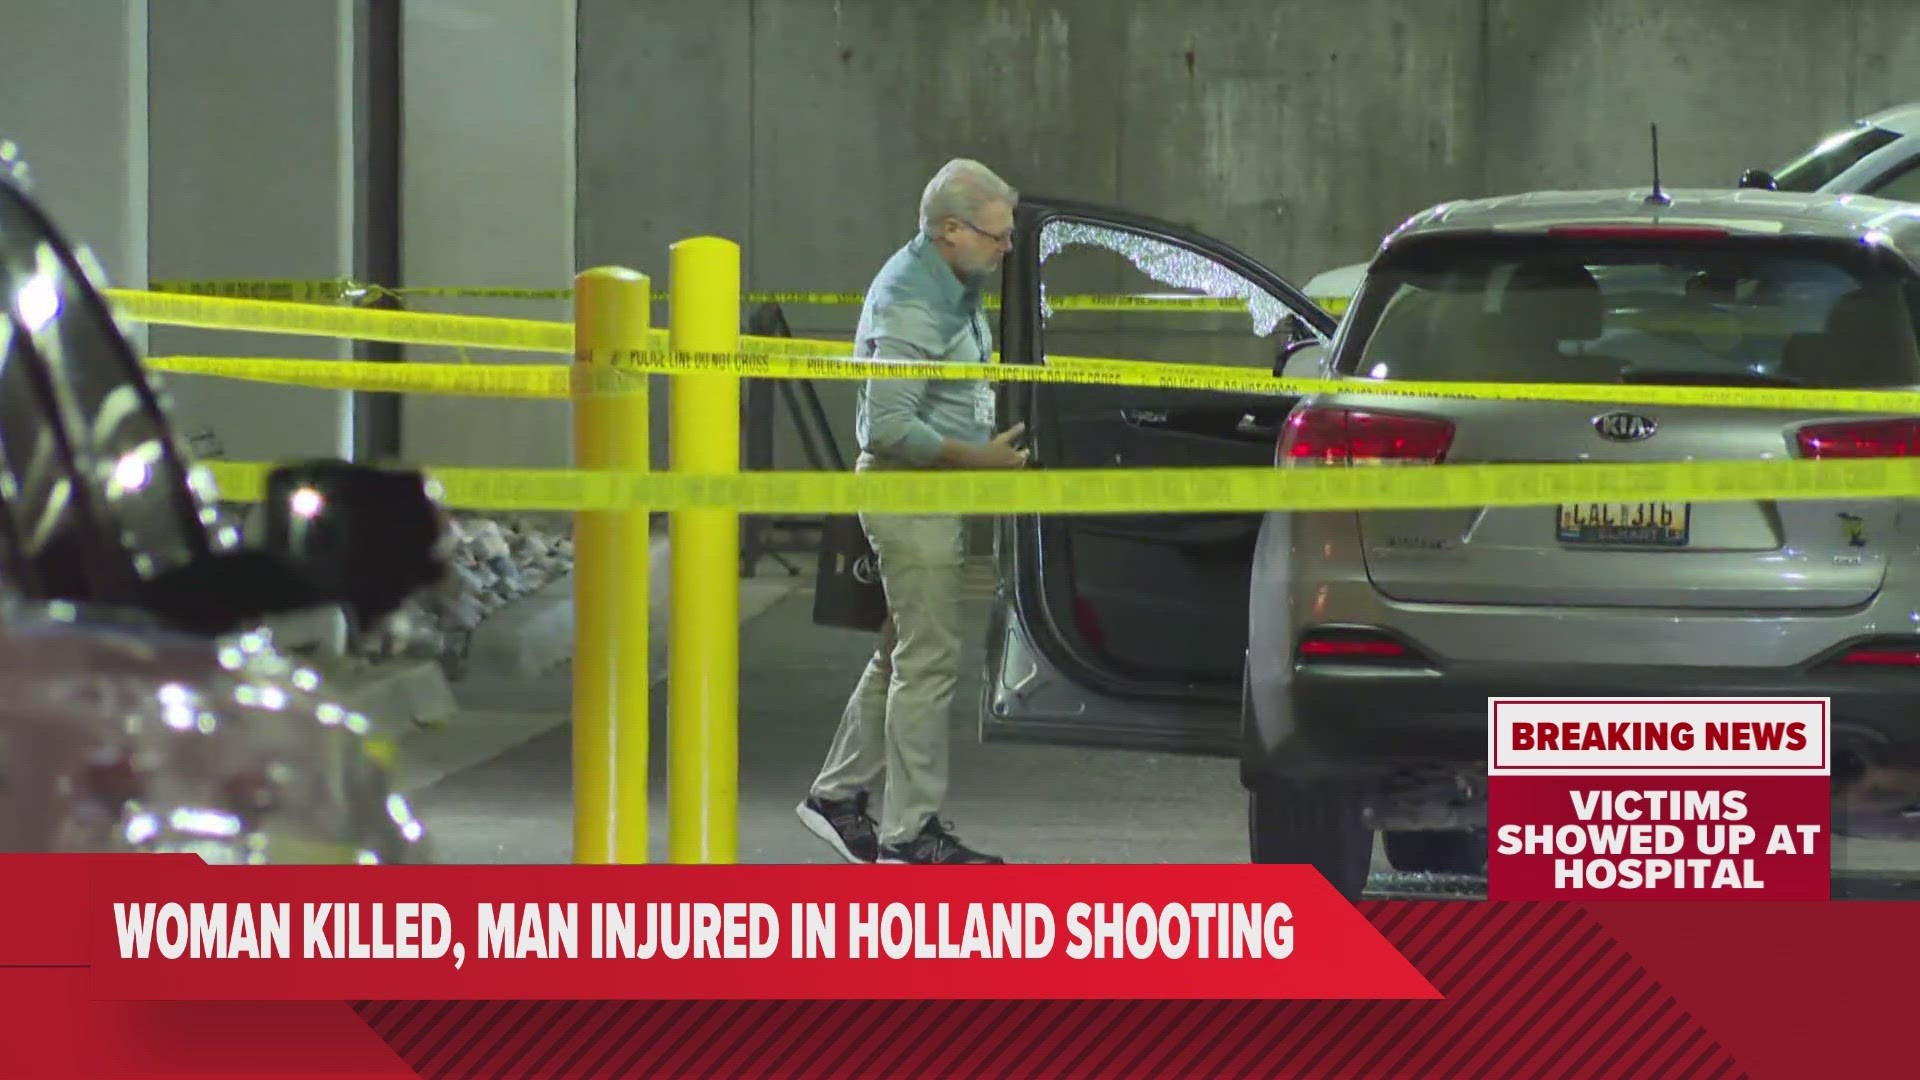 Authorities are investigating a homicide after a shooting in Holland Monday night.